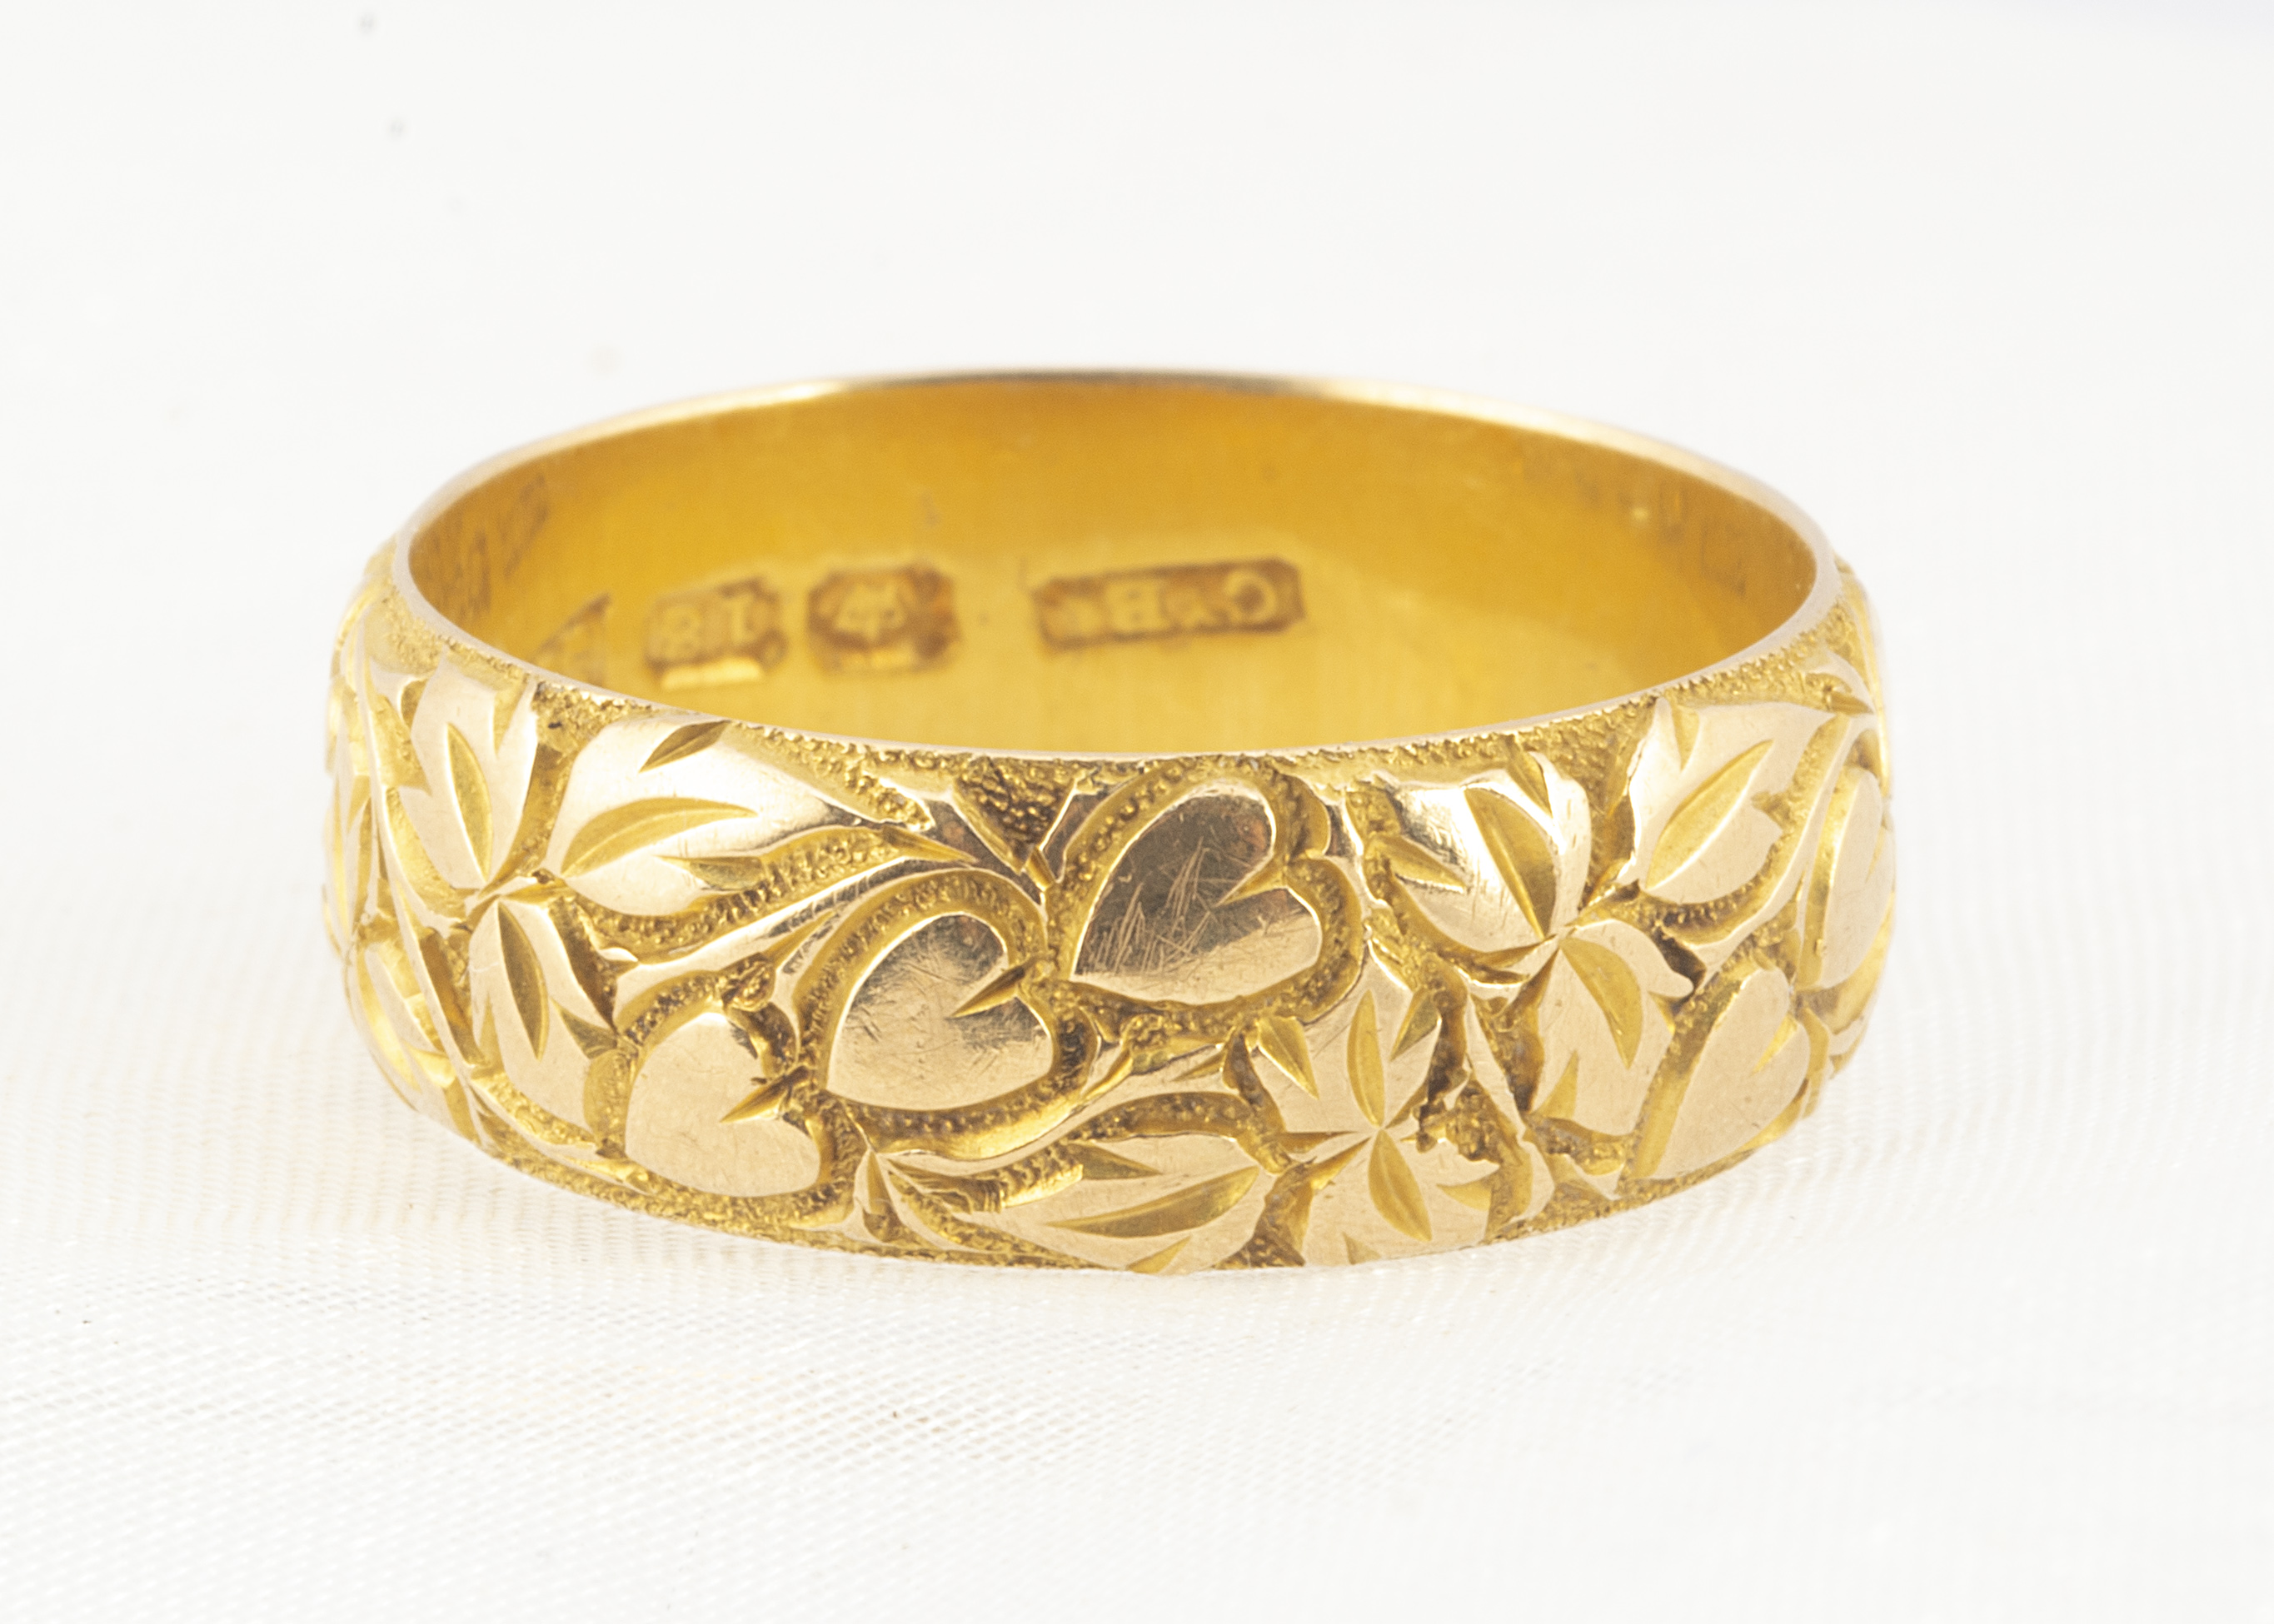 An 18ct gold engraved wedding band, of domed flattened form, with engraved hearts within a wreath of